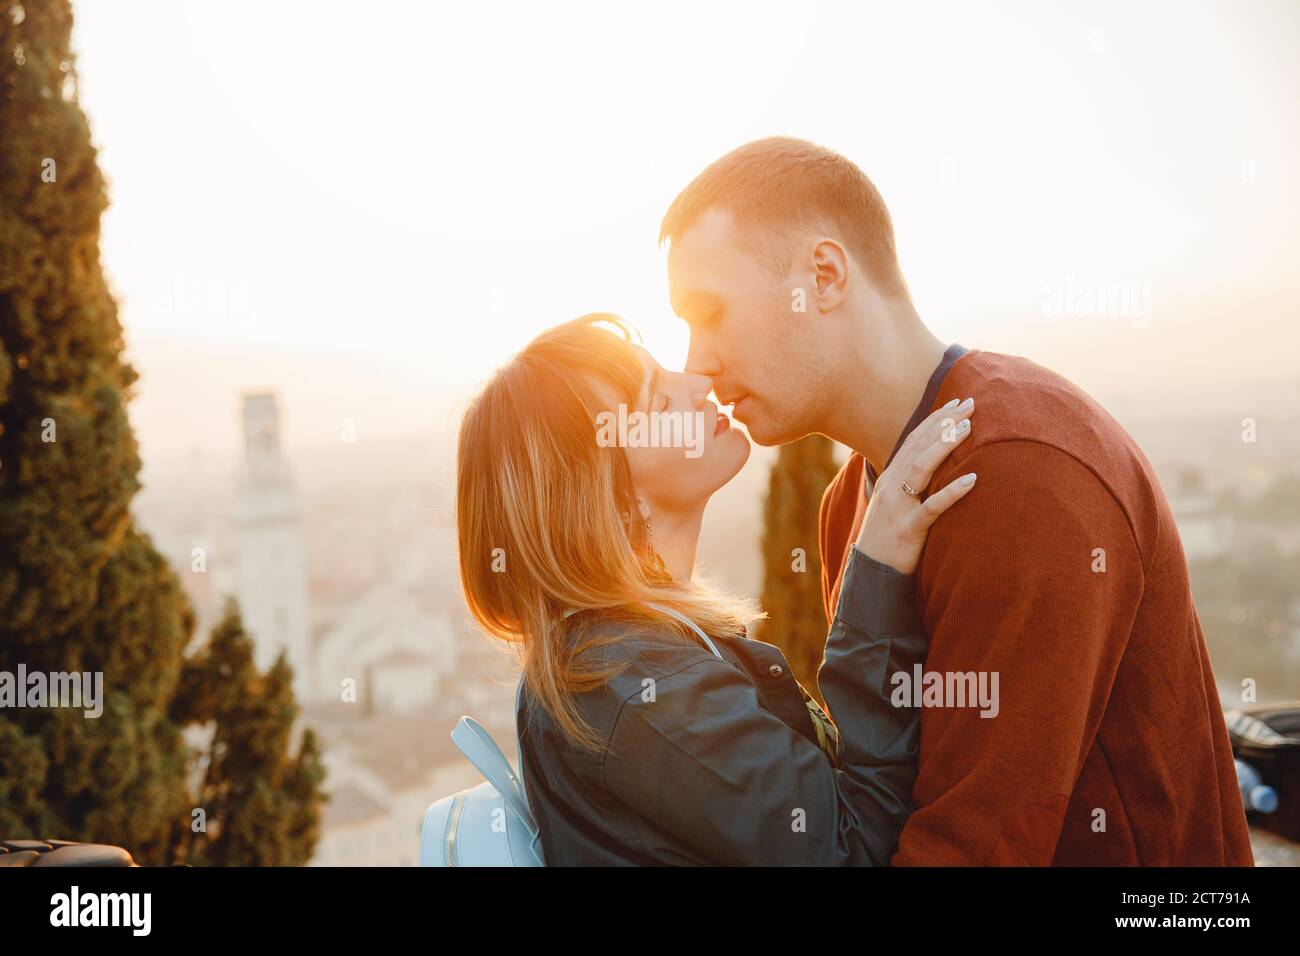 Romantic couple man and girl hug and kiss on sunset background of city Verona Italy. Travel concept Stock Photo